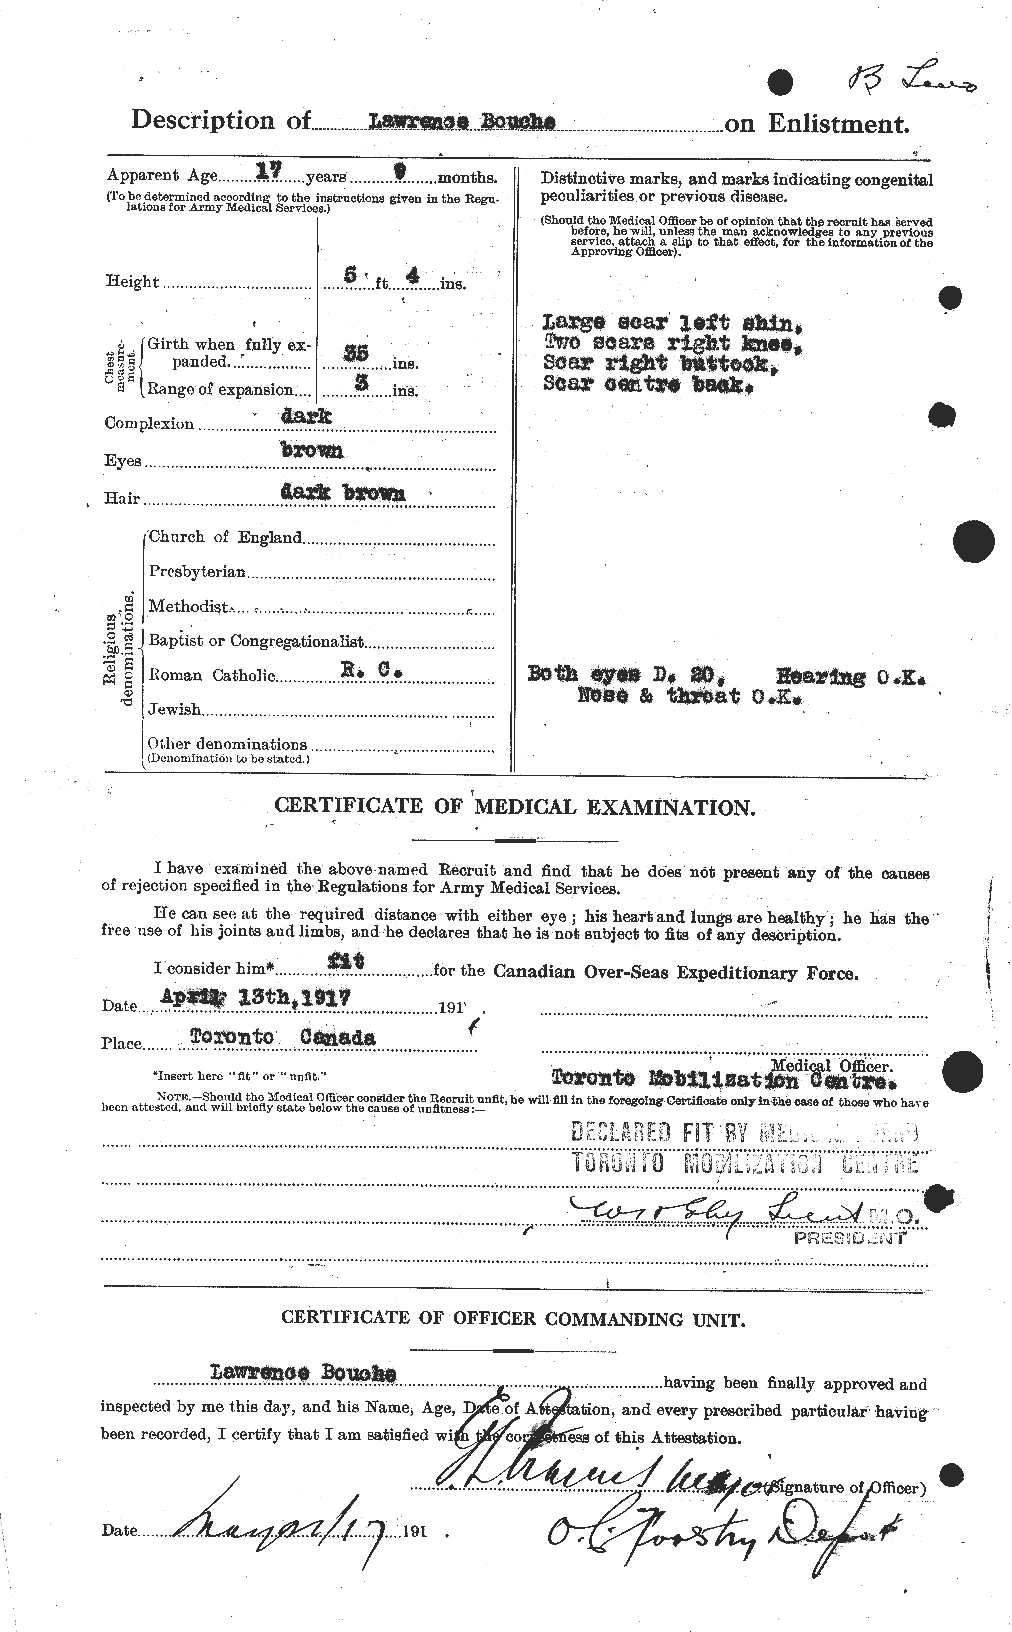 Personnel Records of the First World War - CEF 254957b